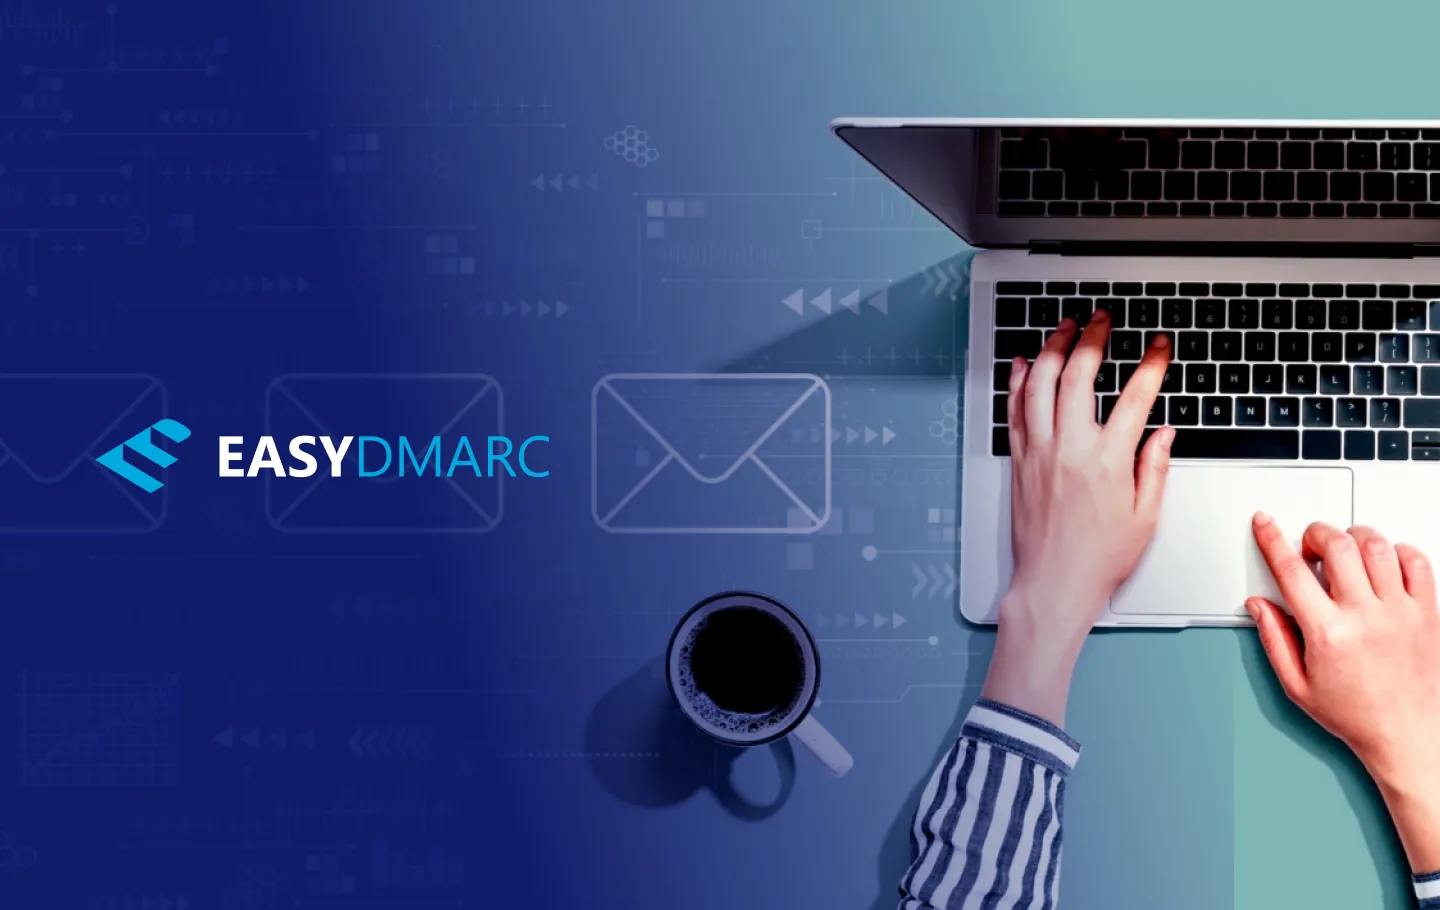 DMARC deployment mistakes while implementing DMARC Cover